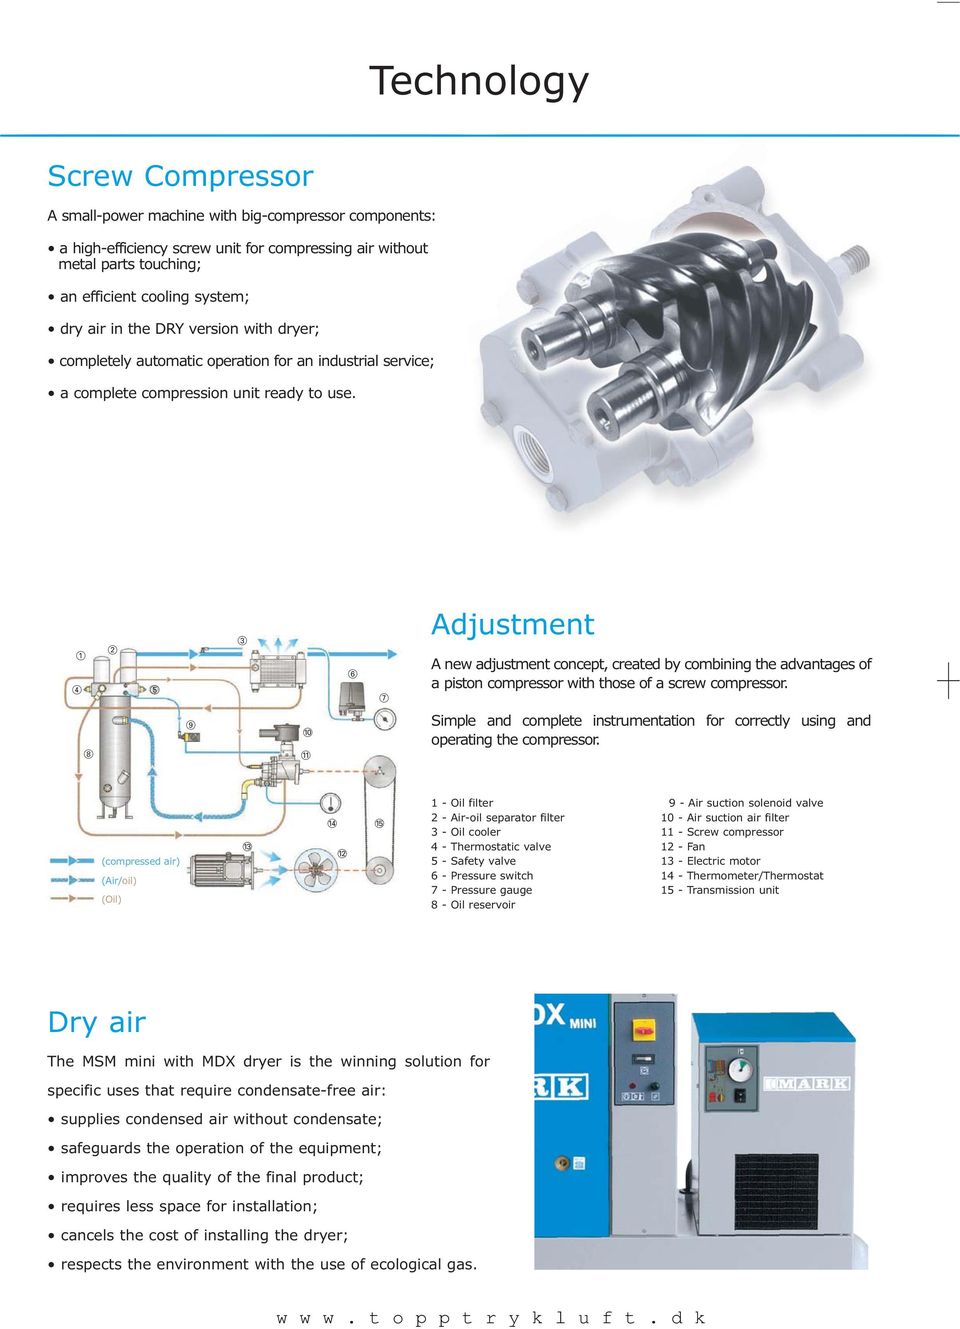 1 4 2 5 3 6 7 Adjustment A new adjustment concept, created by combining the advantages of a piston compressor with those of a screw compressor.